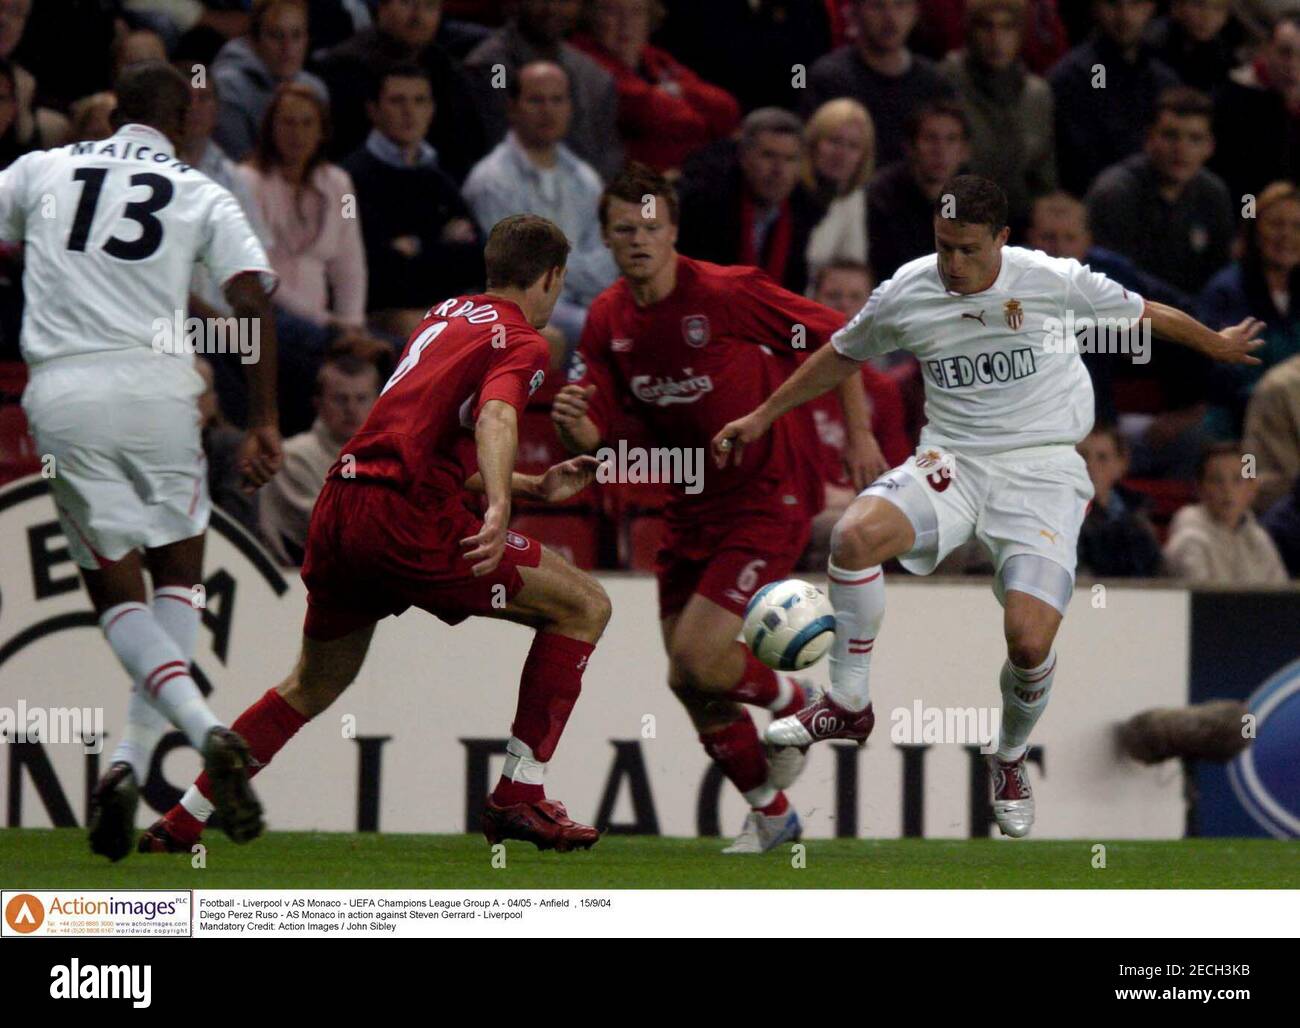 Football - Liverpool v AS Monaco - UEFA Champions League Group A - 04/05 -  Anfield , 15/9/04 Diego Perez Ruso - AS Monaco in action against Steven  Gerrard - Liverpool Mandatory Credit: Action Images / John Sibley Stock  Photo - Alamy